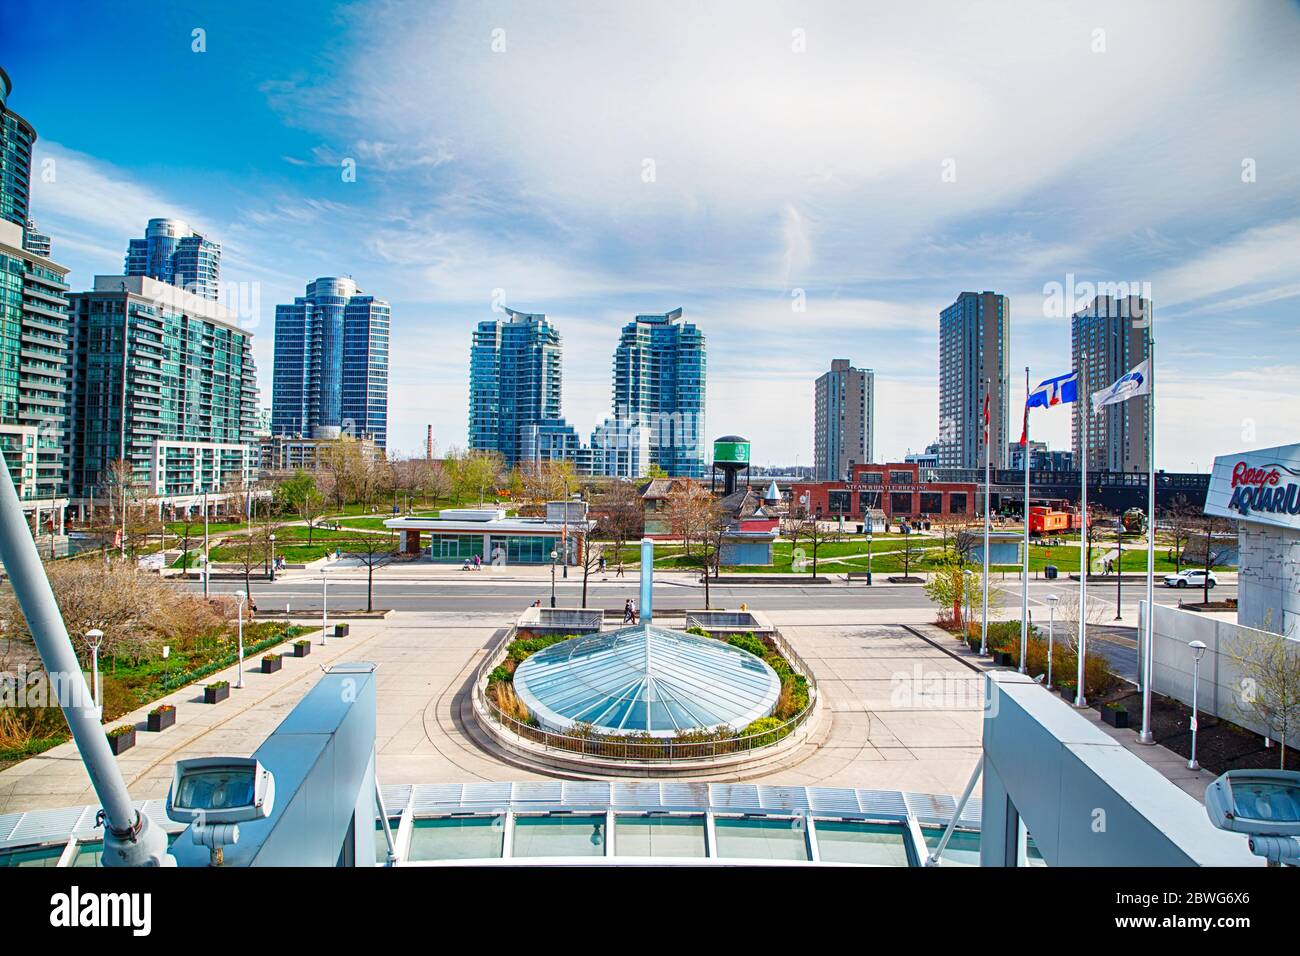 Toronto, Canada - May 3, 2020: Bremner Blvd view from Metro Toronto Convention Centre in Downtown Toronto, Ontario. Stock Photo